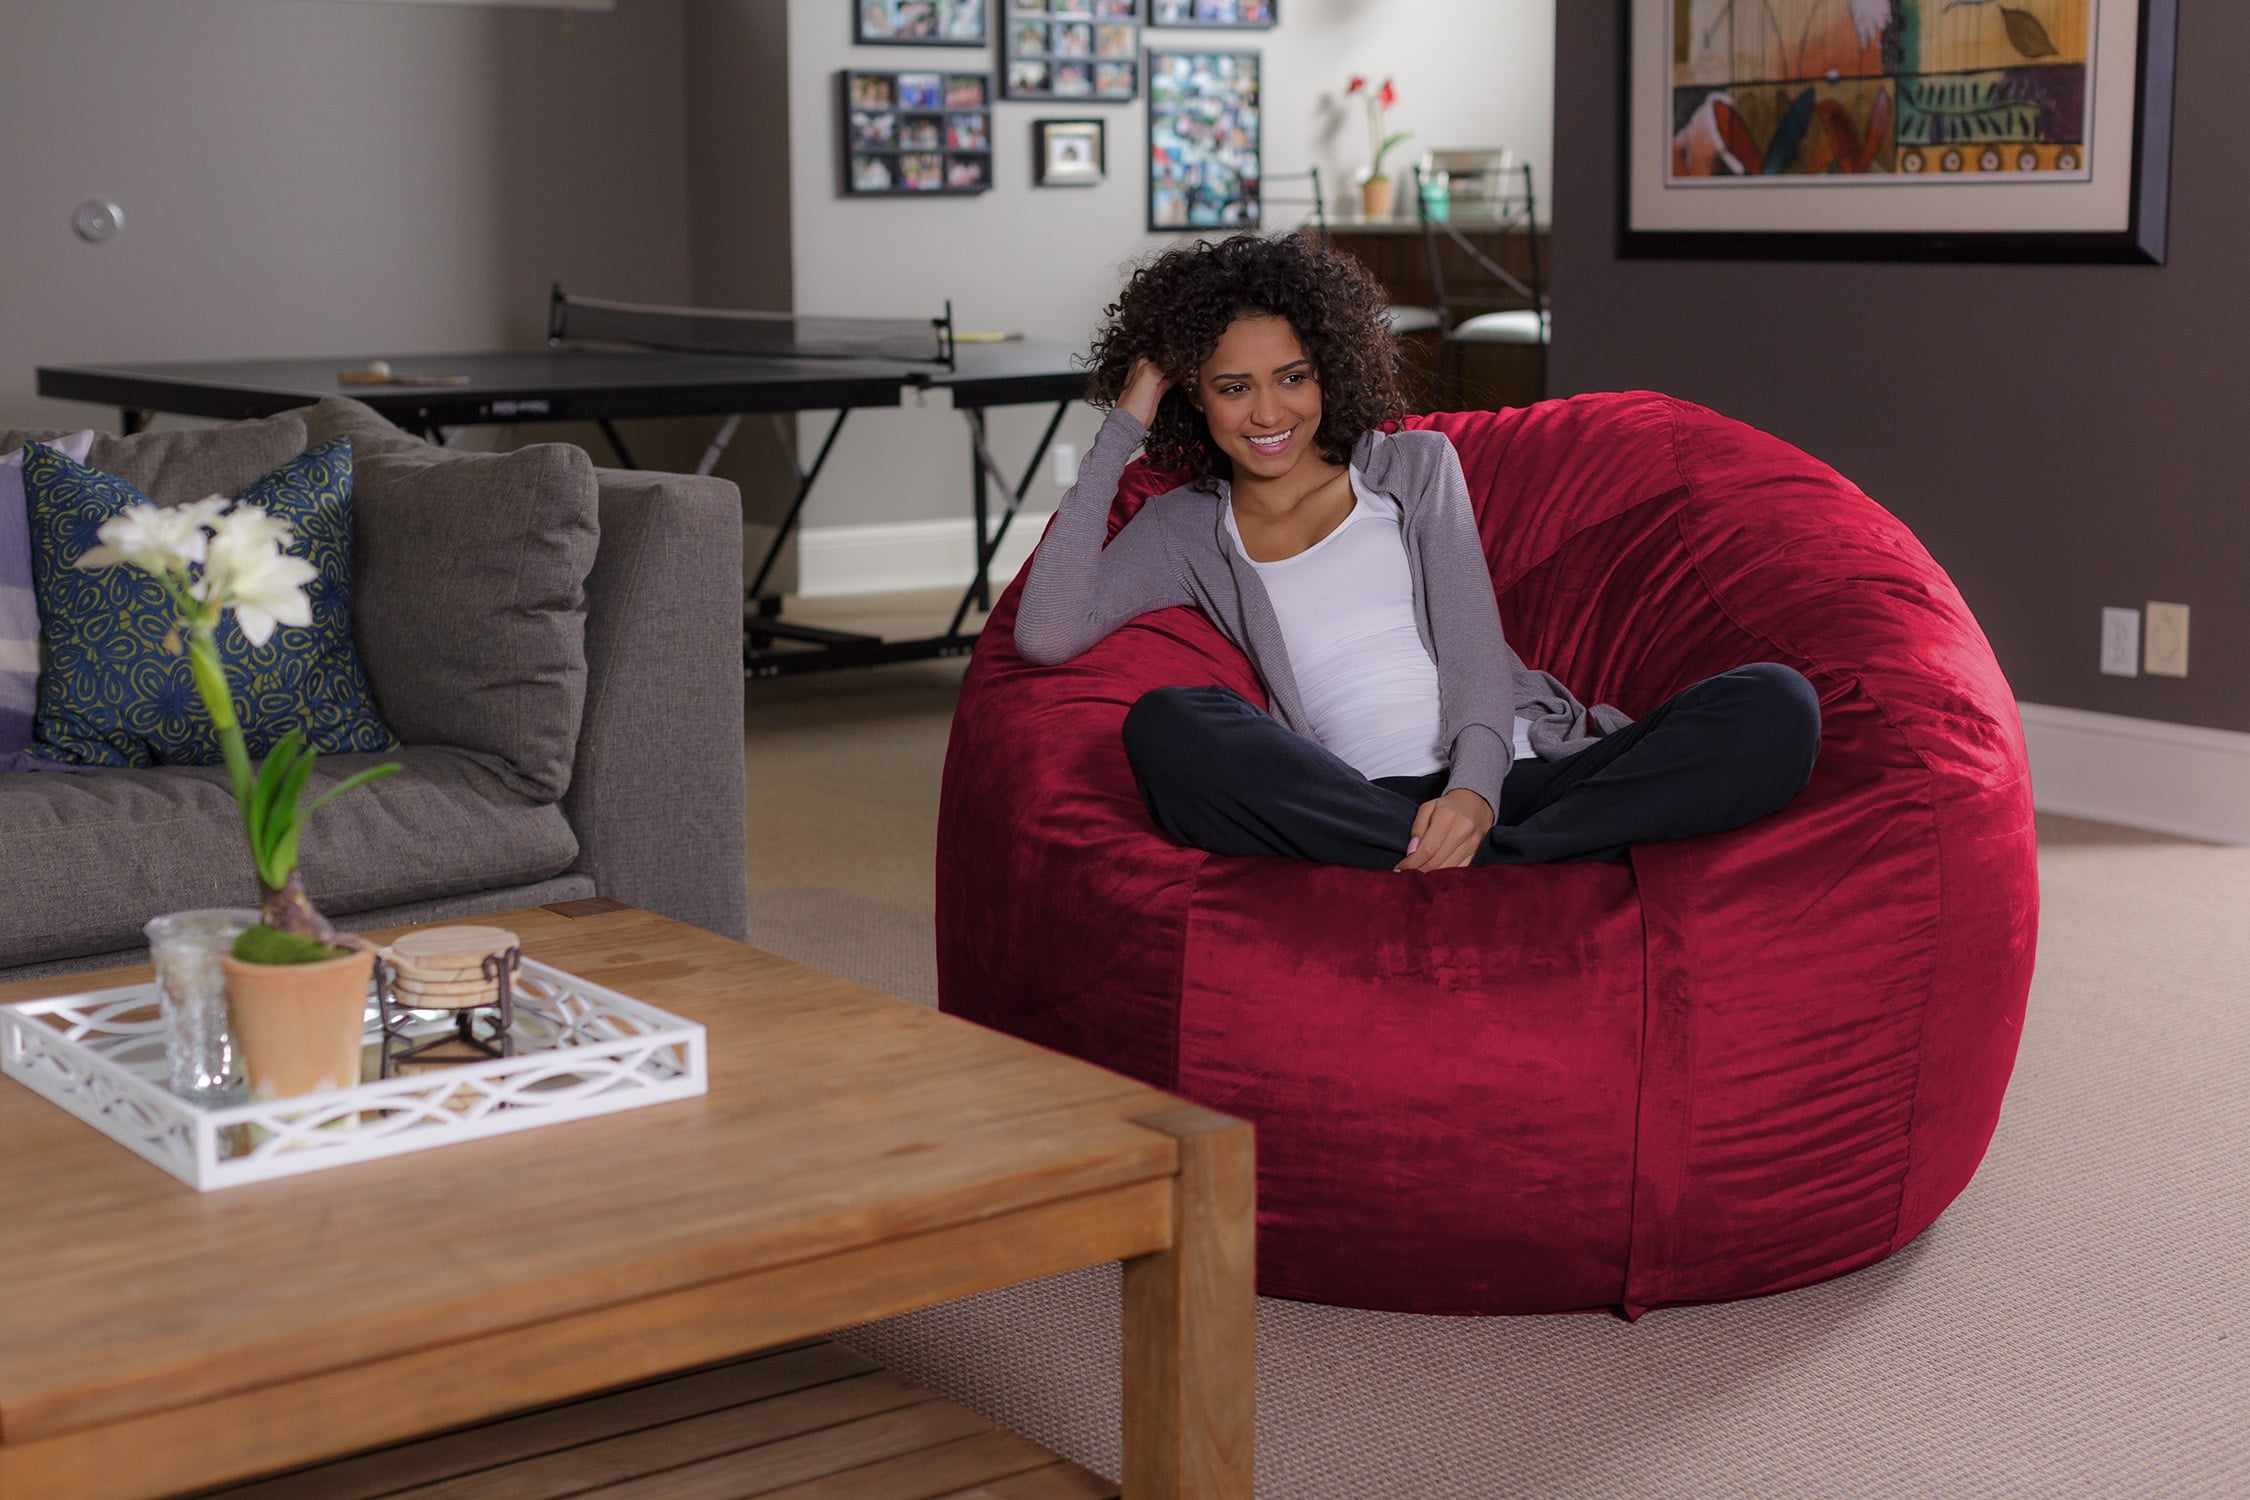 5' Large Bean Bag Chair With Memory Foam Filling And Washable Cover Red -  Relax Sacks : Target